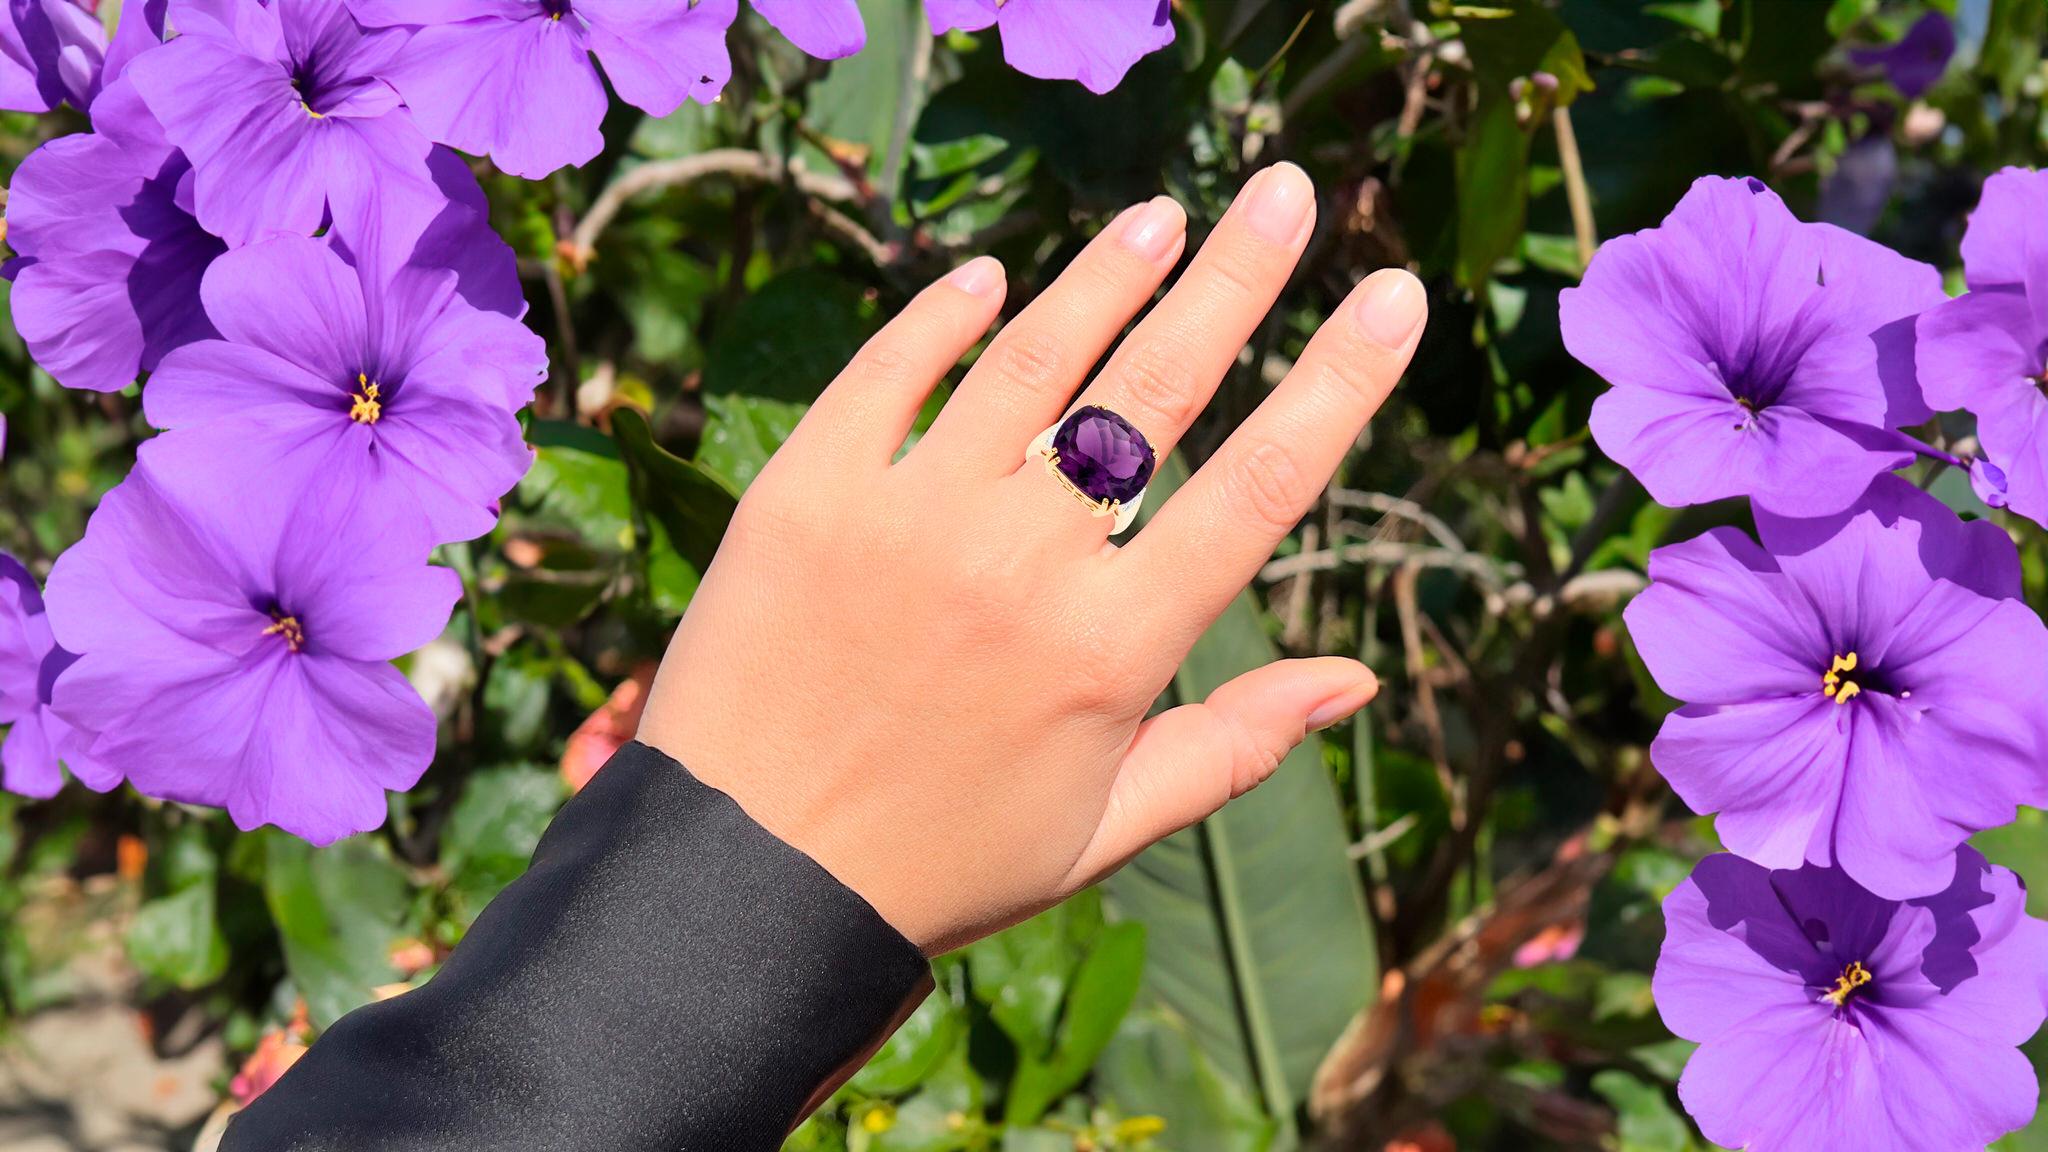 It comes with the original IGI Certificate
All Gemstones are Natural
Amethyst = 11.25 Carats
Diamonds = 0.28 Carats
Metal: 14K Yellow Gold
Ring Size: 7* US
*It can be resized complimentary